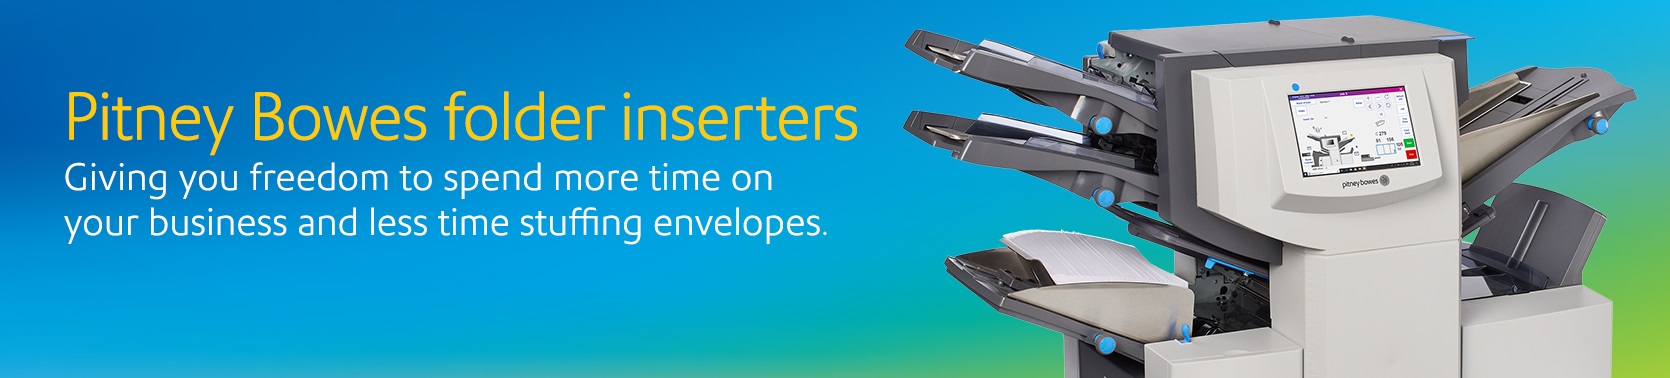 Pitney Bowes Folders Inserters. Giving you the freedom to spend more time on your business and less time stuffing envelopes.